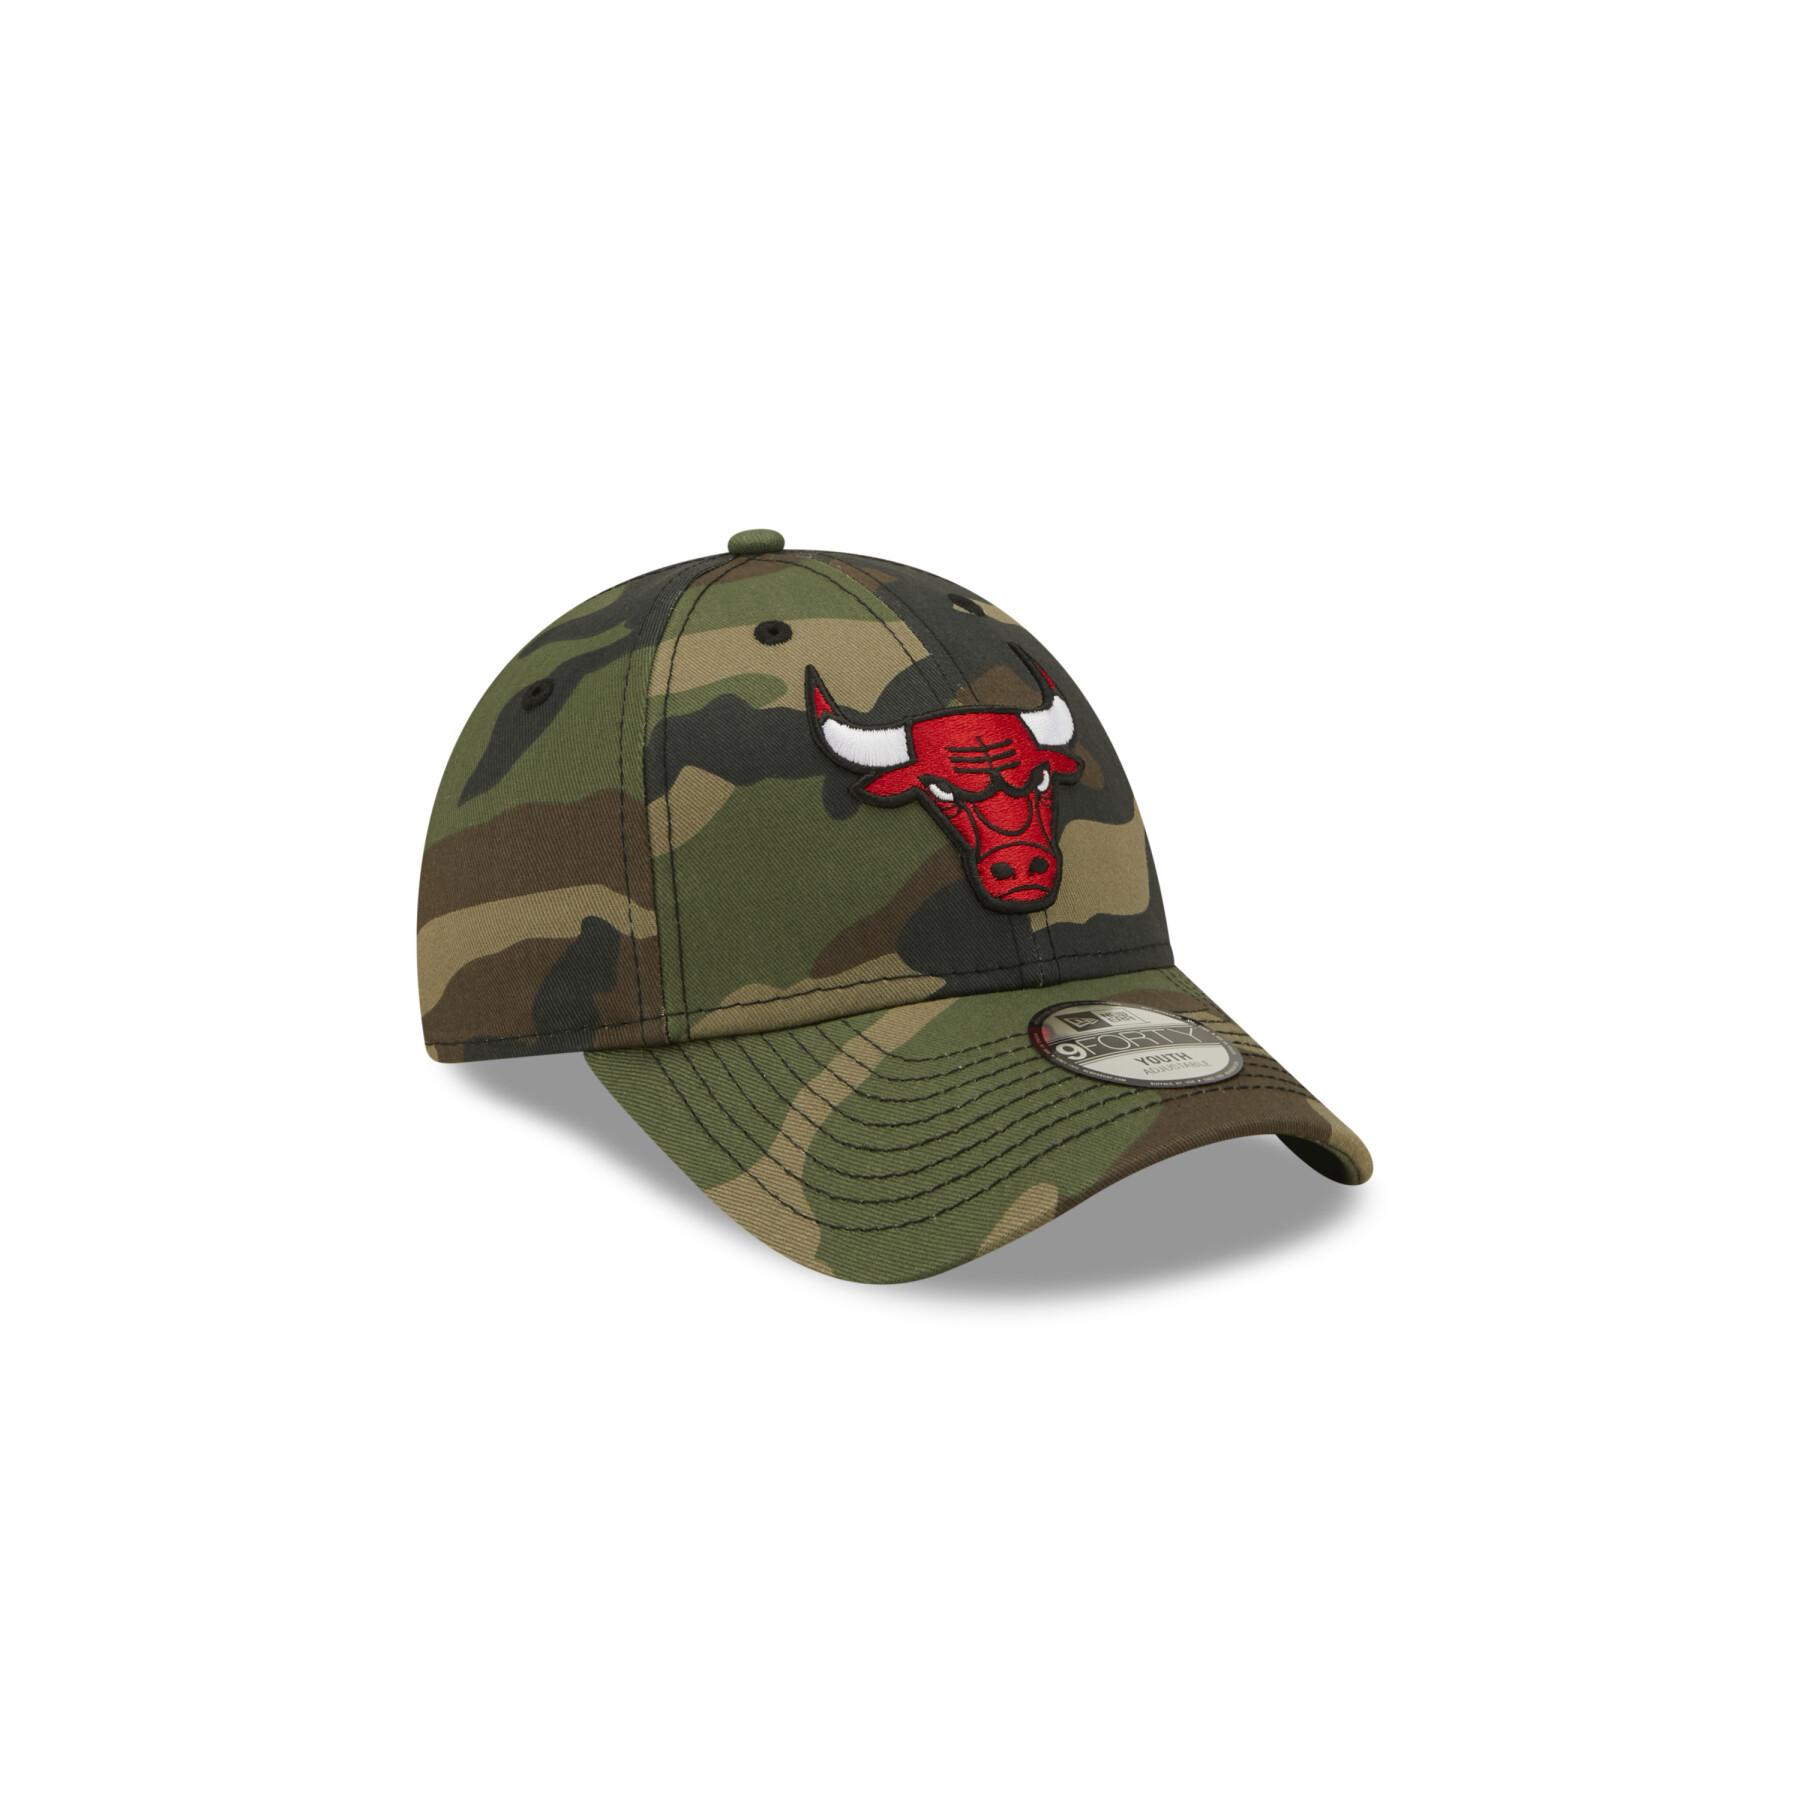 Casquette 9forty Chicago Bulls NBA